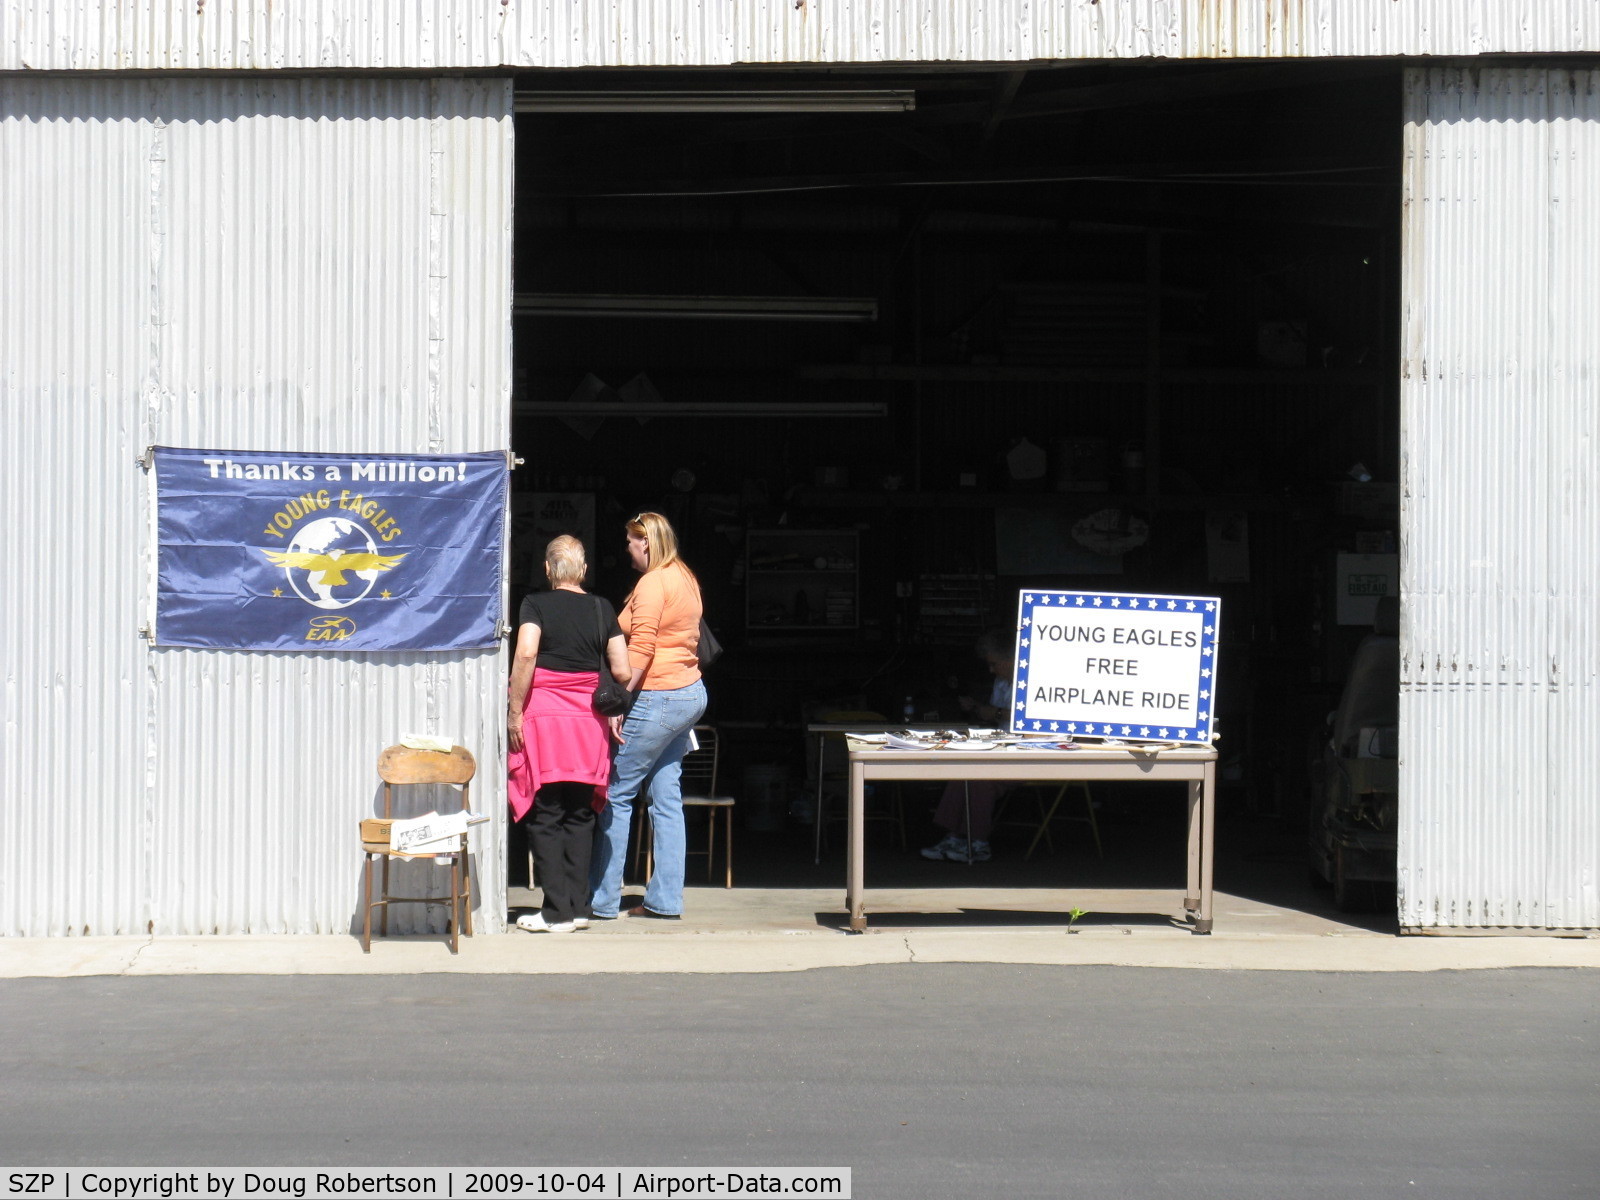 Santa Paula Airport (SZP) - Young Eagles Hangar-1st Sundays-Kids 8-17 Free Airplane Rides. Prior appointments needed.